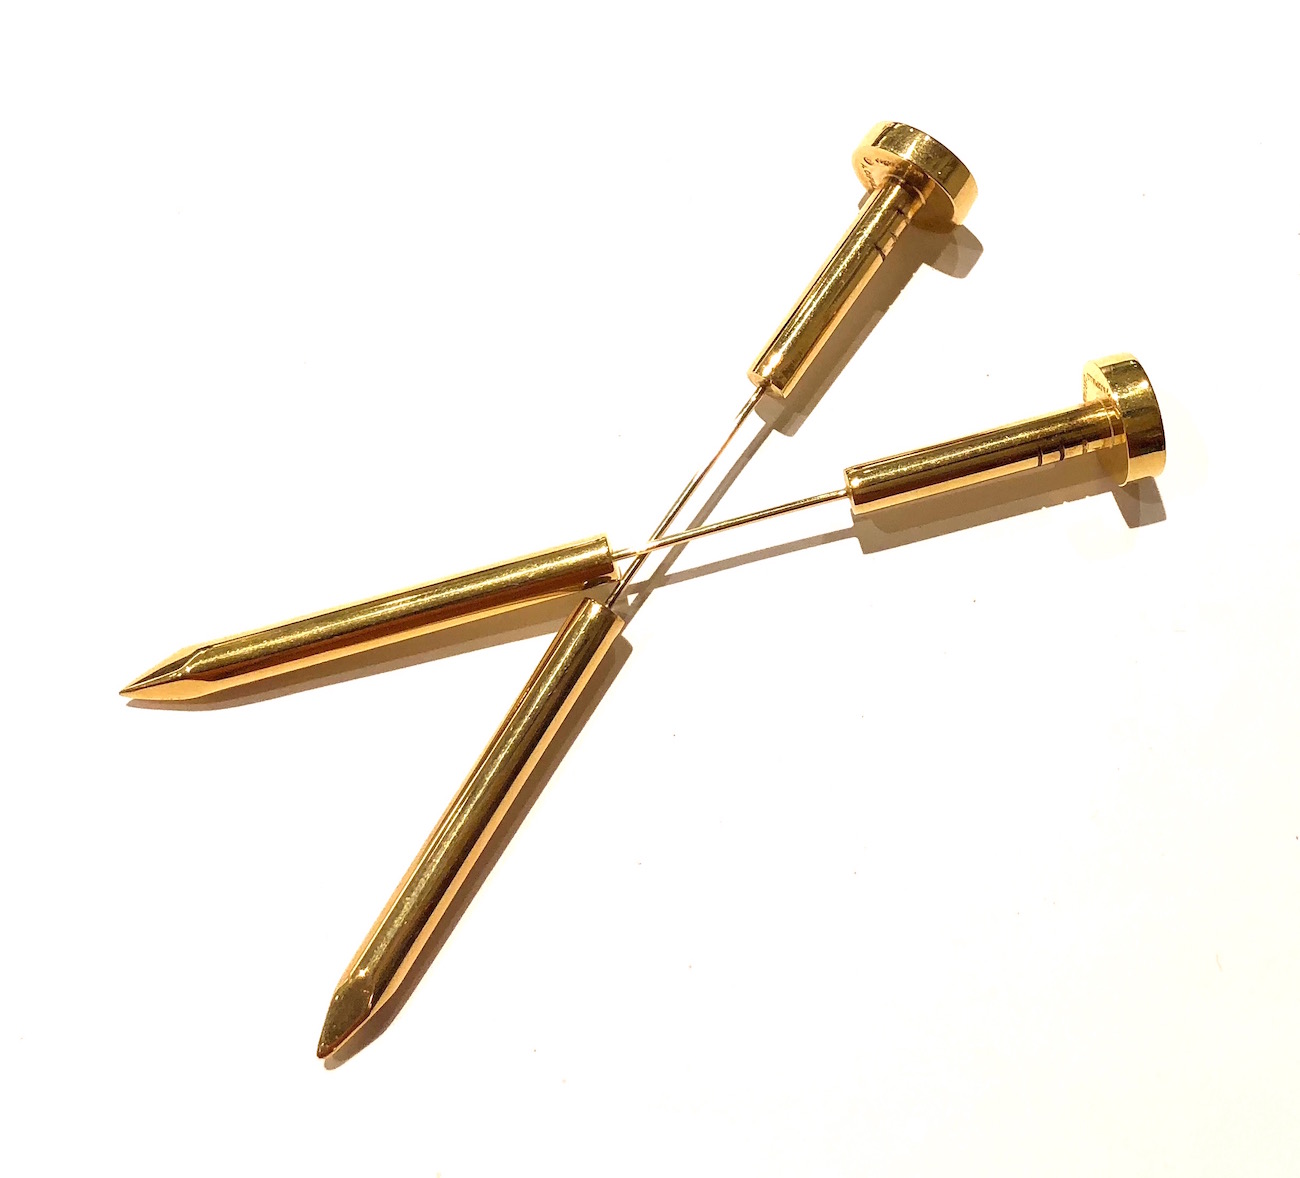 Aldo Cipullo for Cartier “Juste un Clou” or “Nail” brooches in 18K yellow gold, signed, 1971